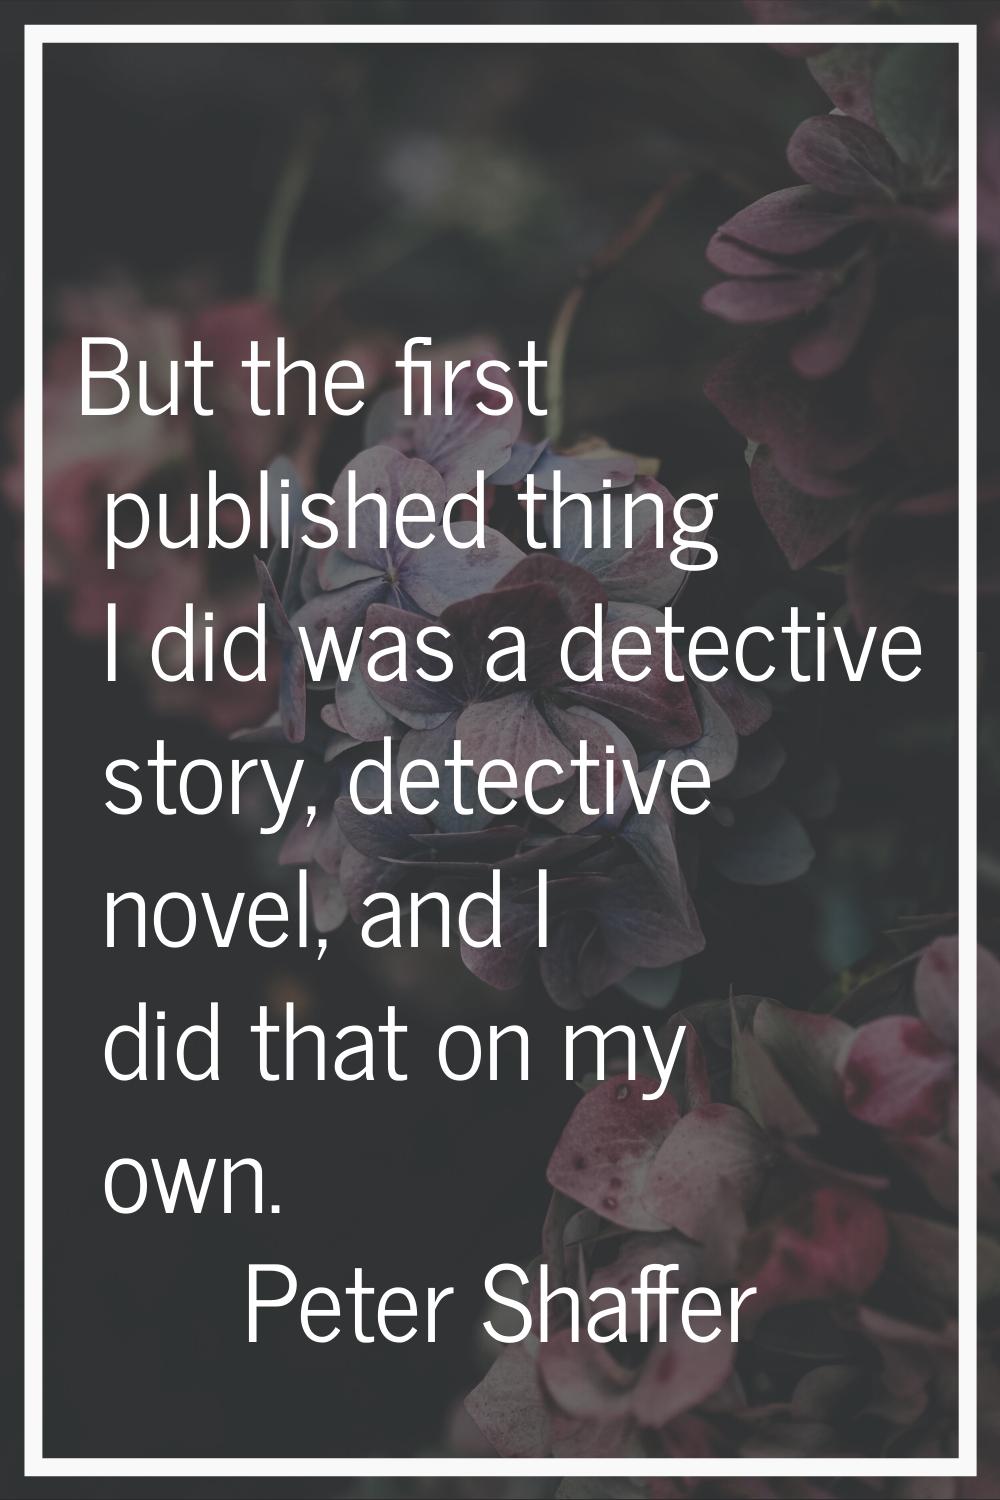 But the first published thing I did was a detective story, detective novel, and I did that on my ow